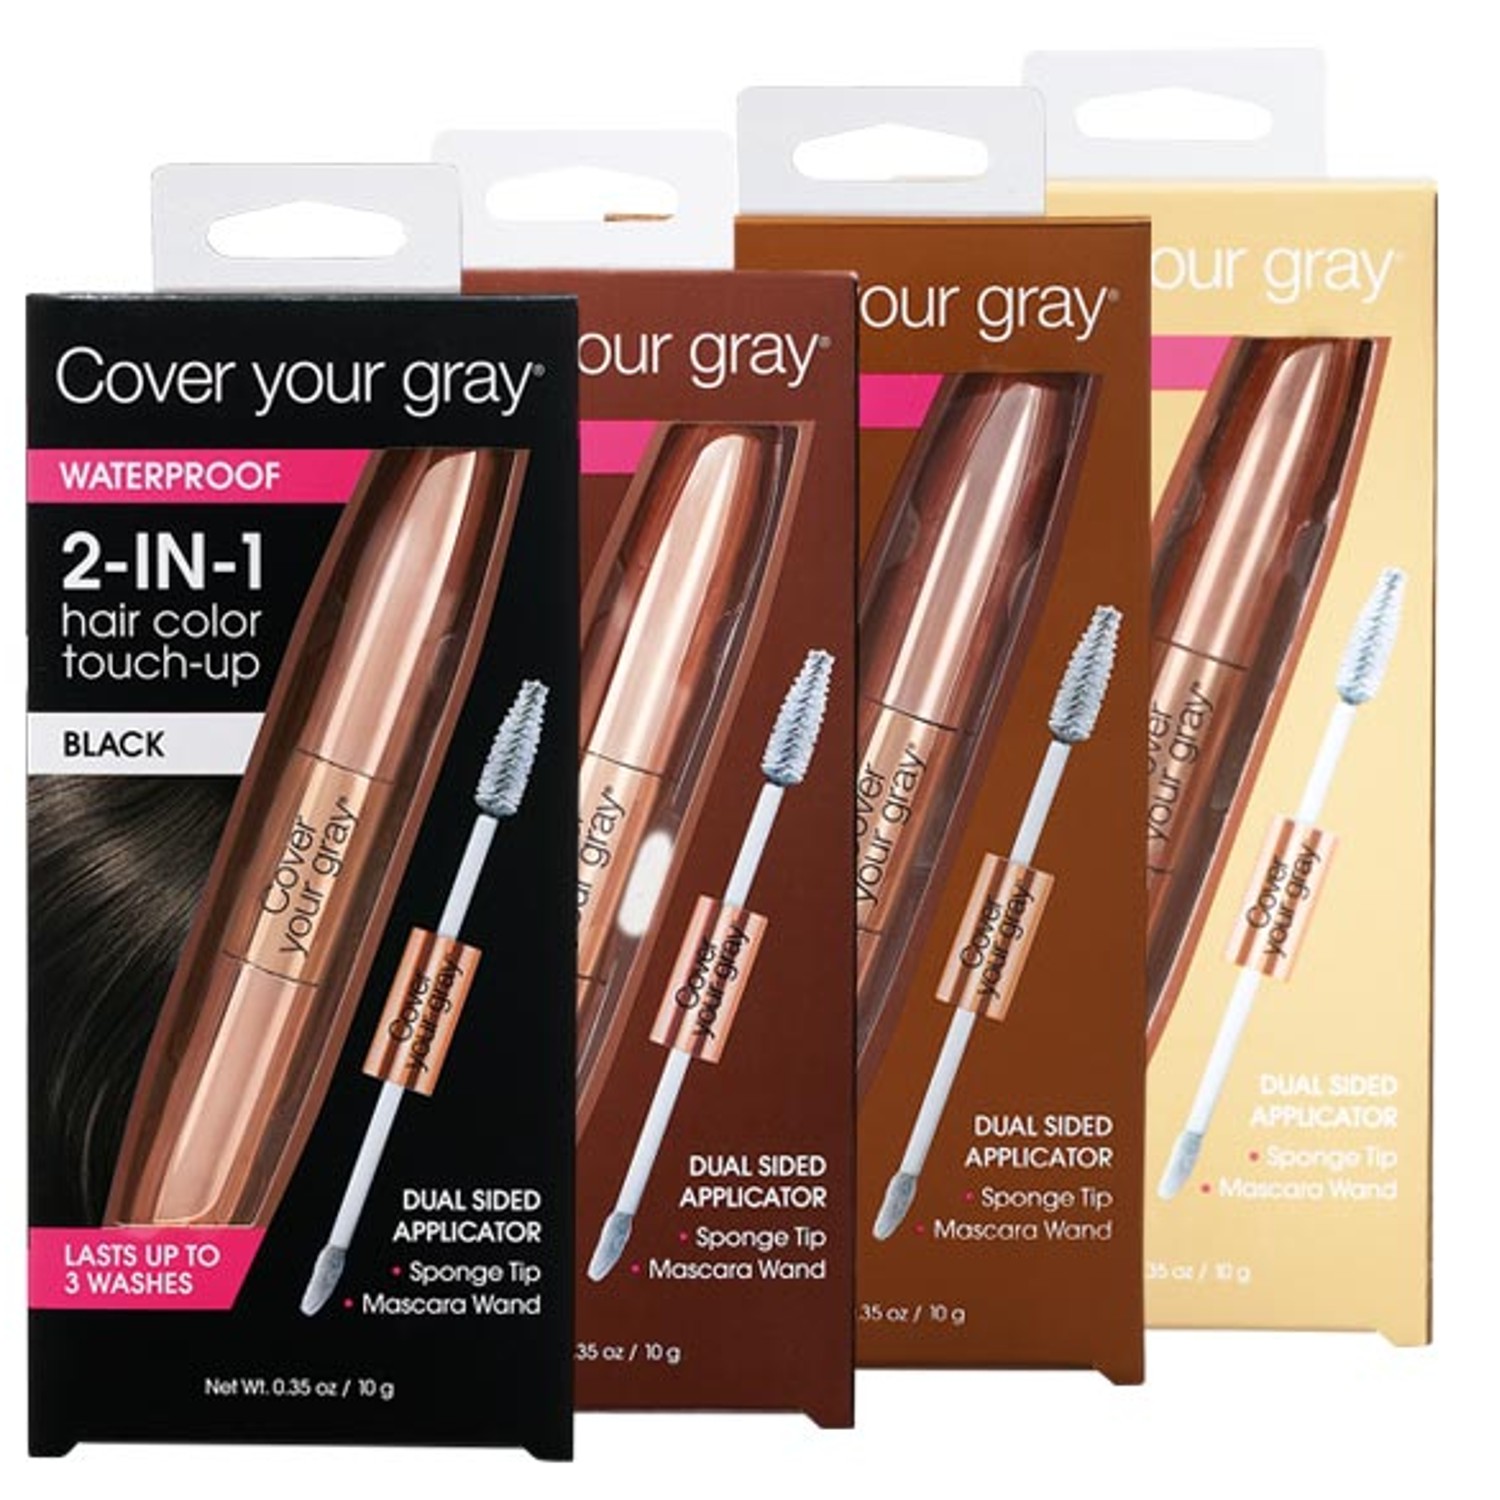 Cover your gray Waterproof 2-in-1 10 g